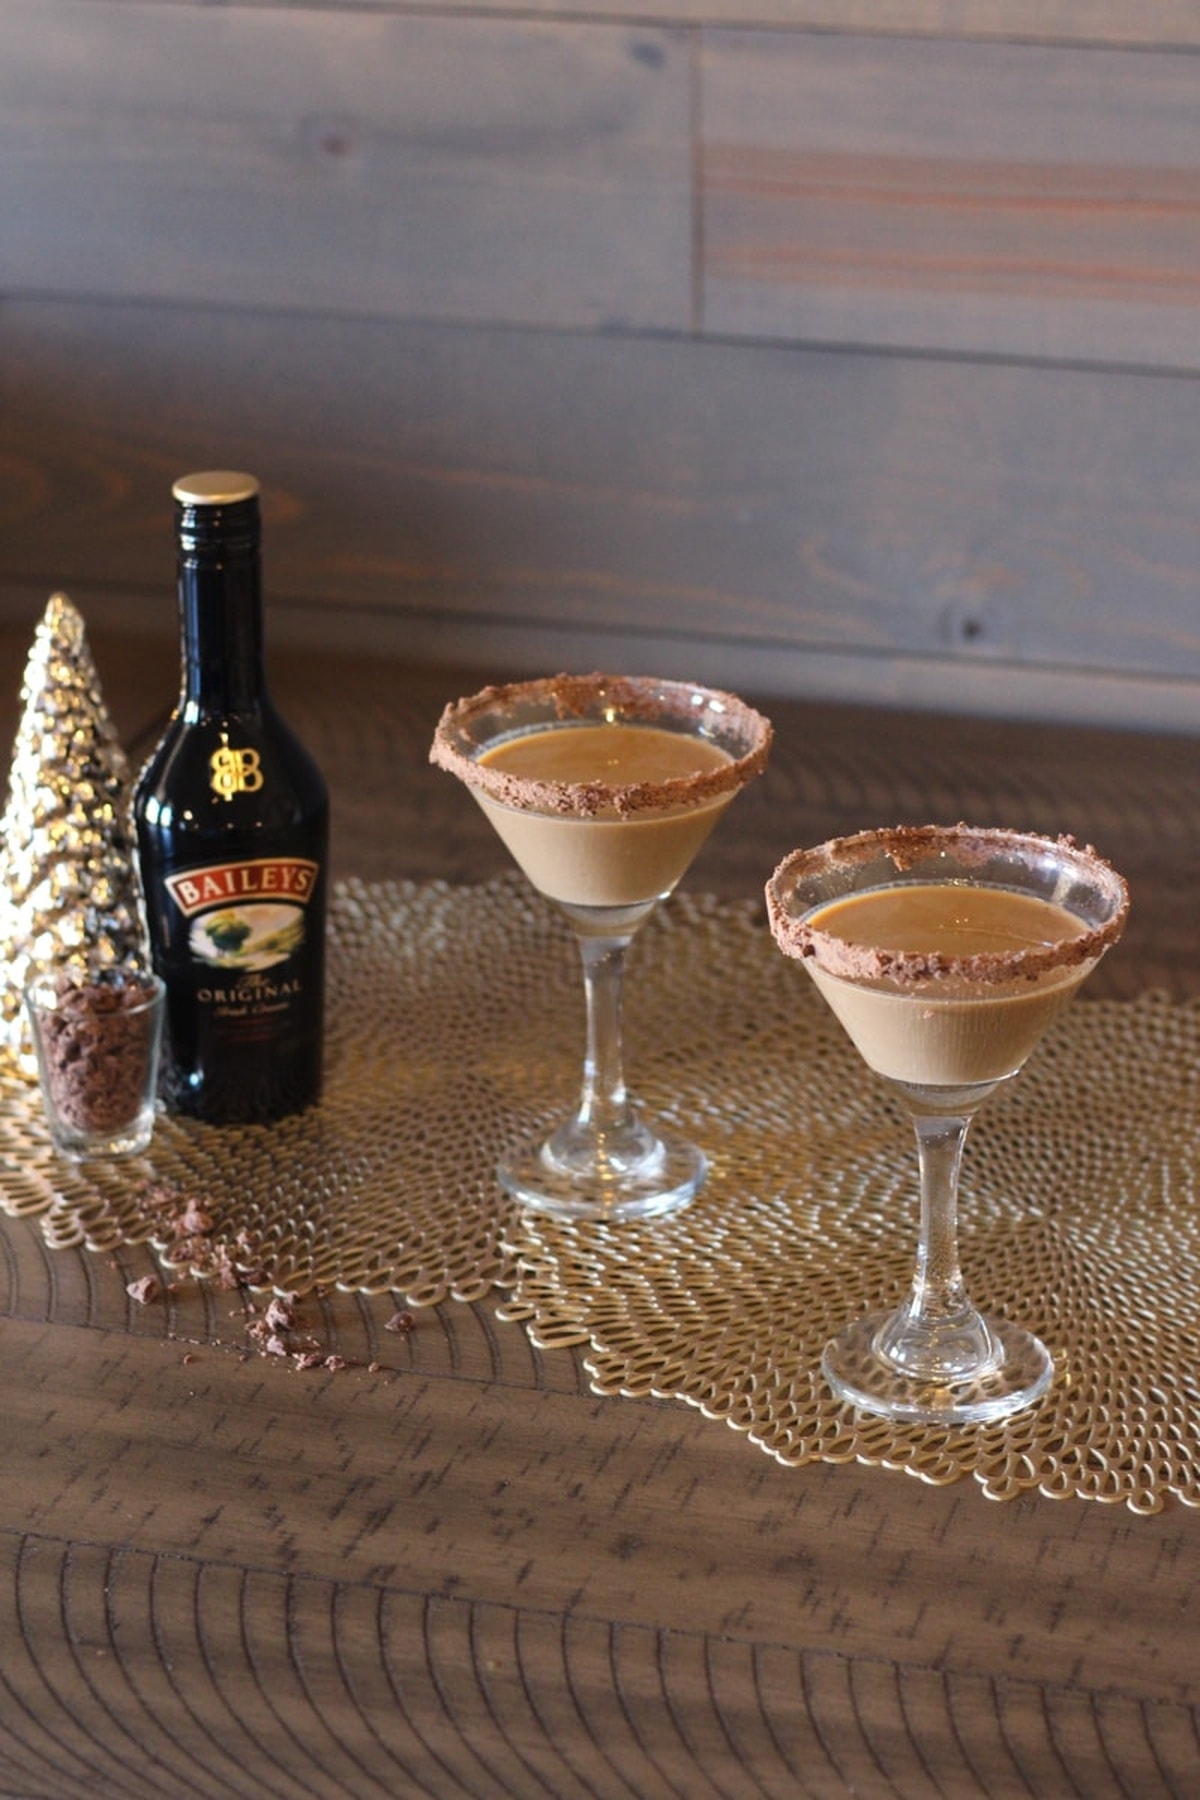 Two glasses of Baileys Chocolate Martini with chocolate shavings on the rim.